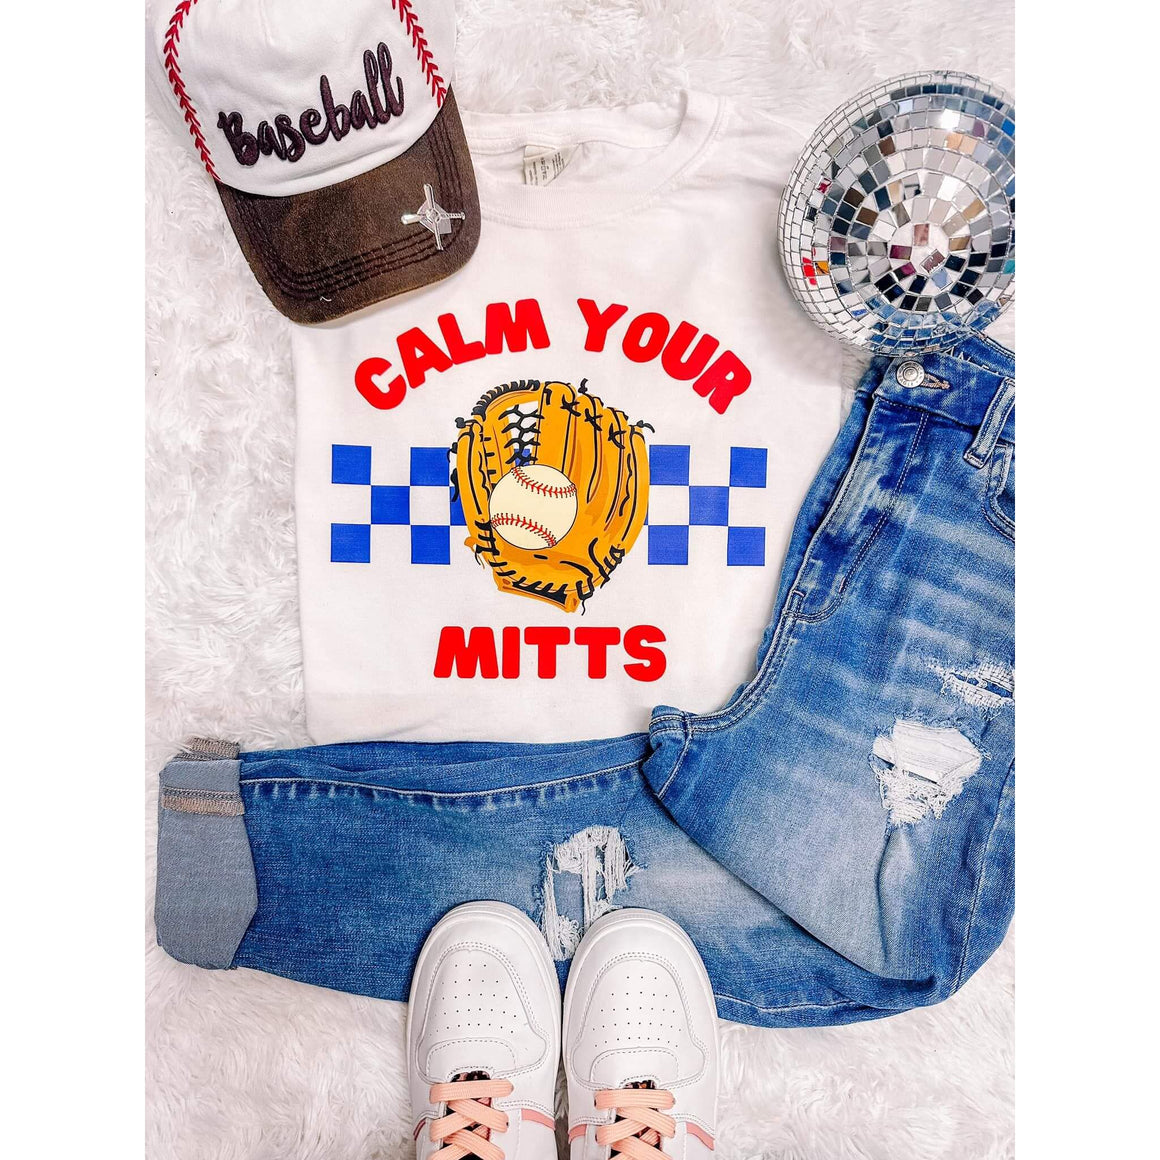 Calm your Mitts Softball Graphic Tee